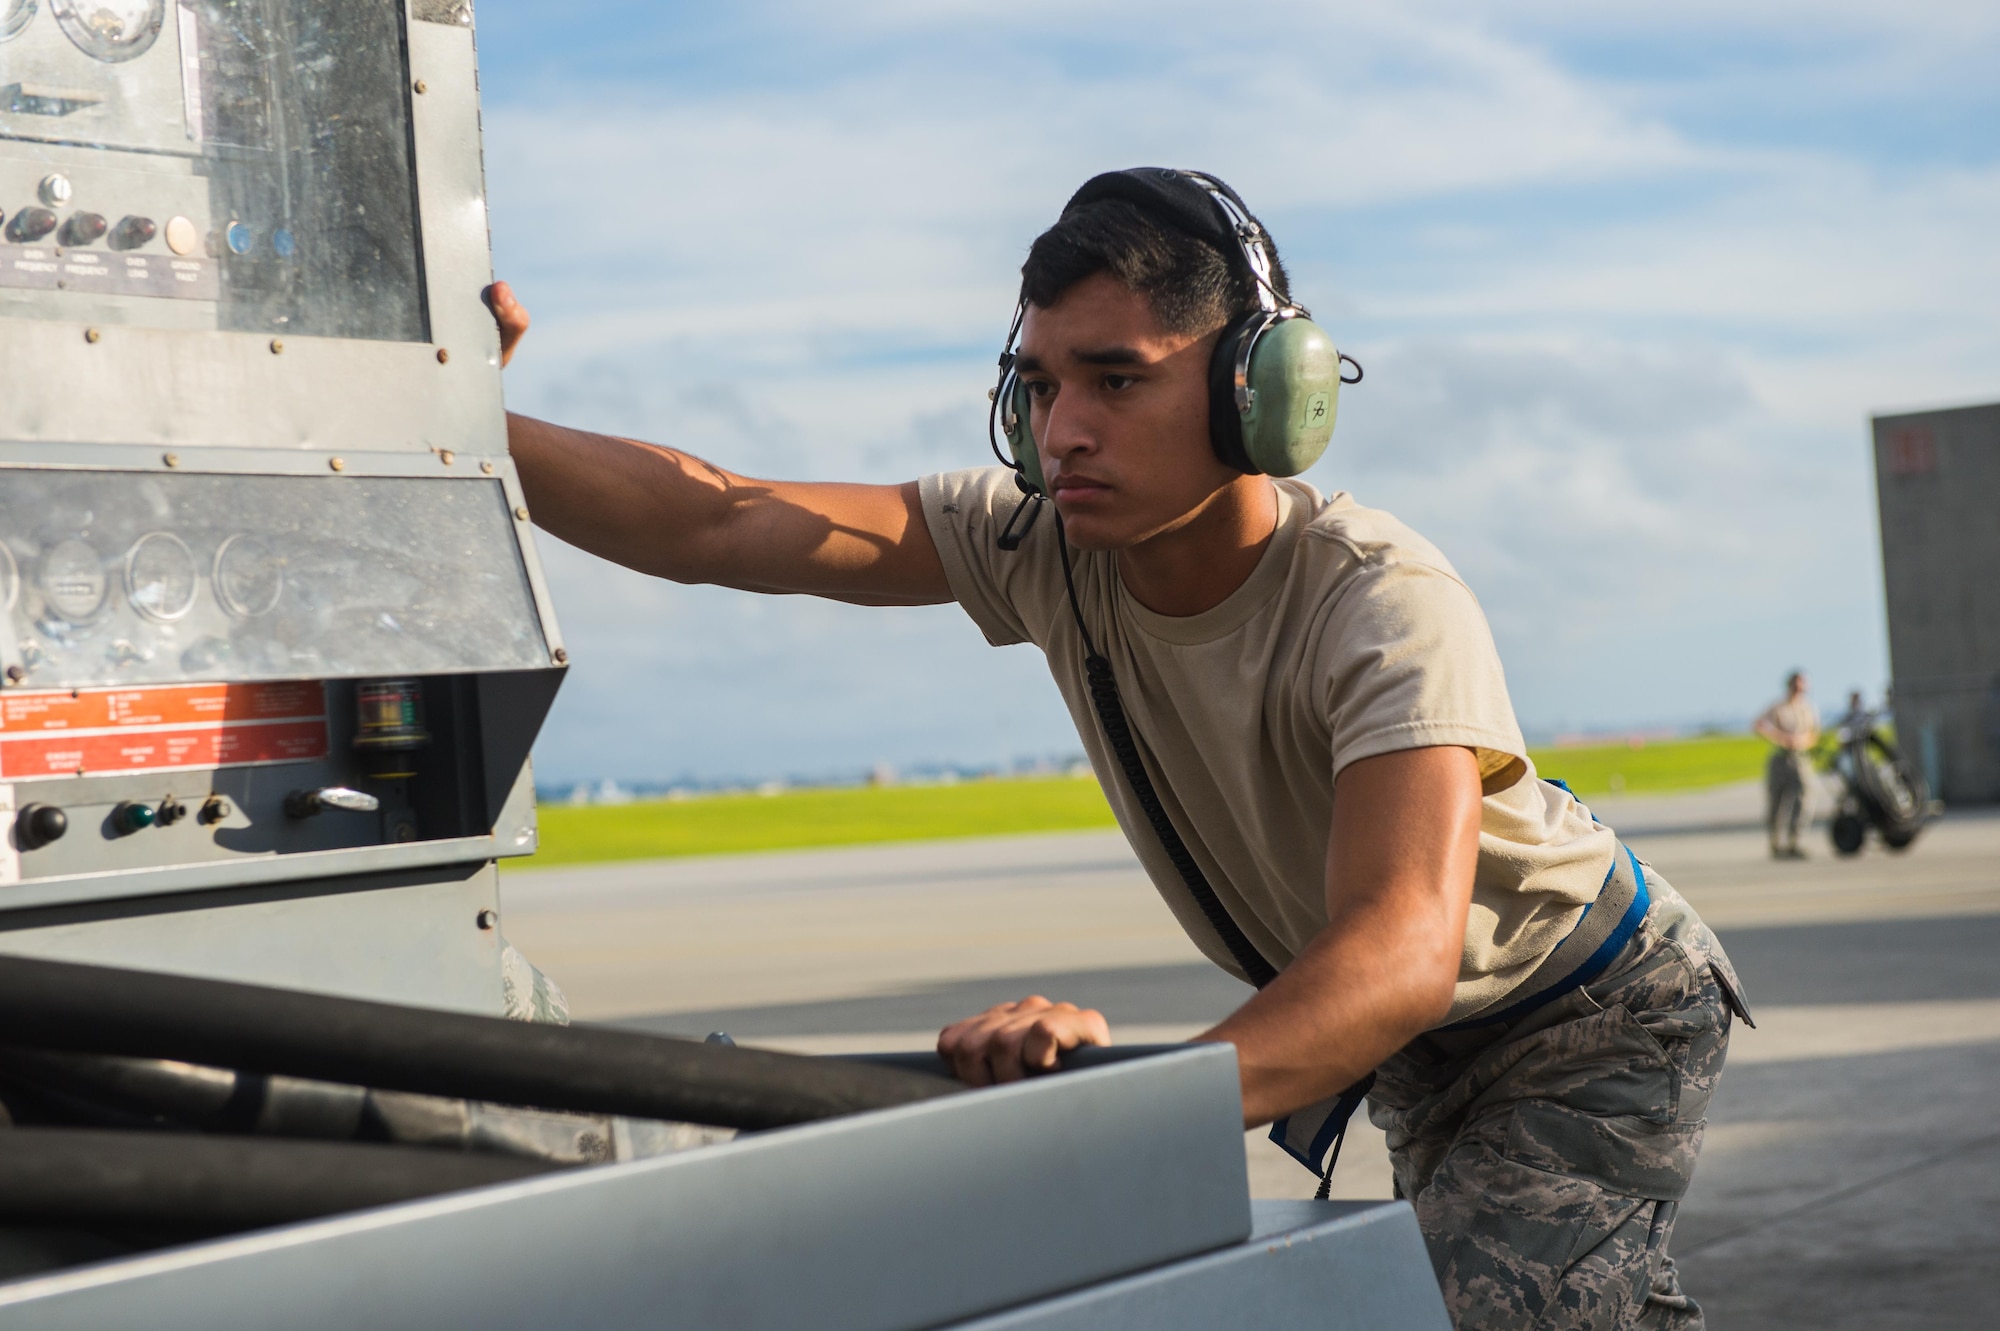 U.S. Air Force Airman 1st Class Eugene Alvarado, an Aerospace Maintenance Apprentice from the 353rd Special Operations Maintenance Squadron pushes a power cart on the Kadena Air Base, Japan, flightline before an MC-130H Combat Talon II formation flight May 14, 2015. By conducting formation flight, aircrews and maintainers test and validate their ability to efficiently generate aircraft and to quickly infiltrate and exfiltrate large numbers of ground forces. (U.S. Air Force photo by Airman 1st Class Tyler Woodward)